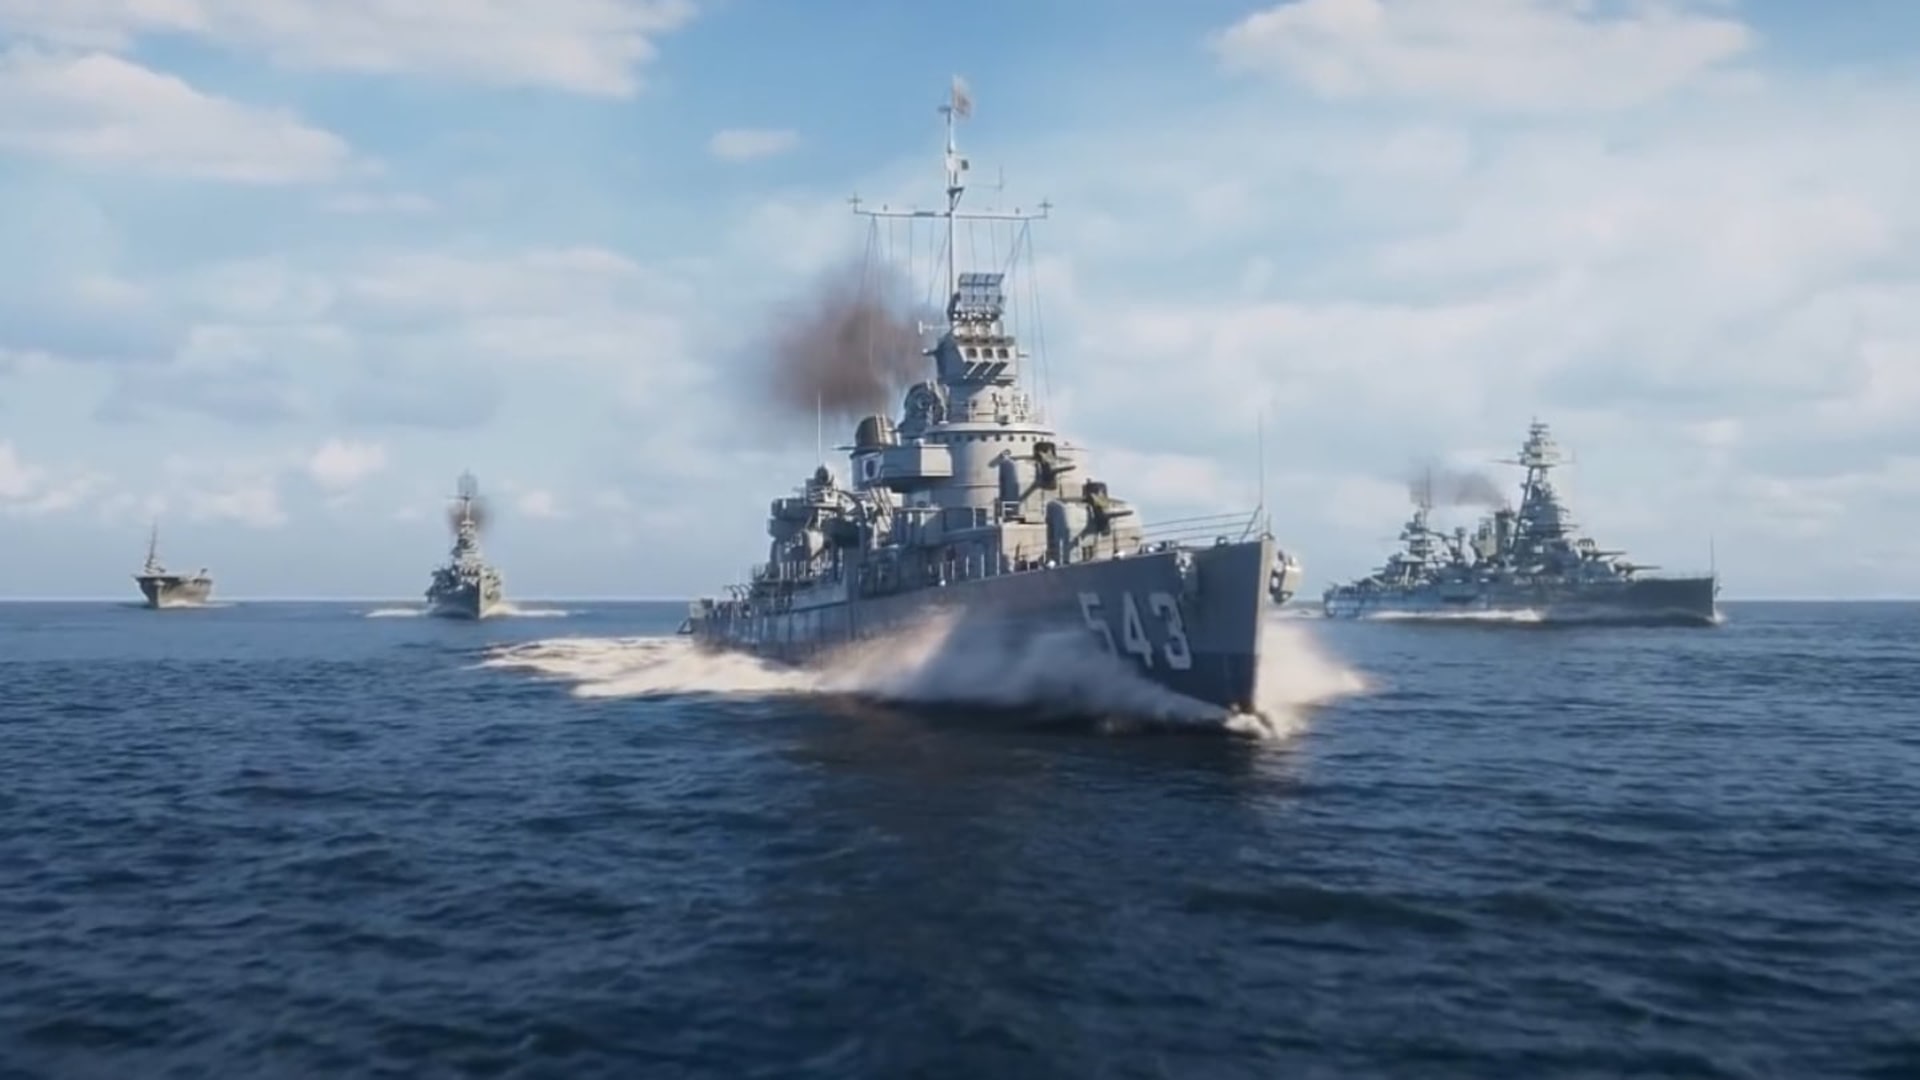 Detailed in-game scene from World of Warships showcasing naval combat